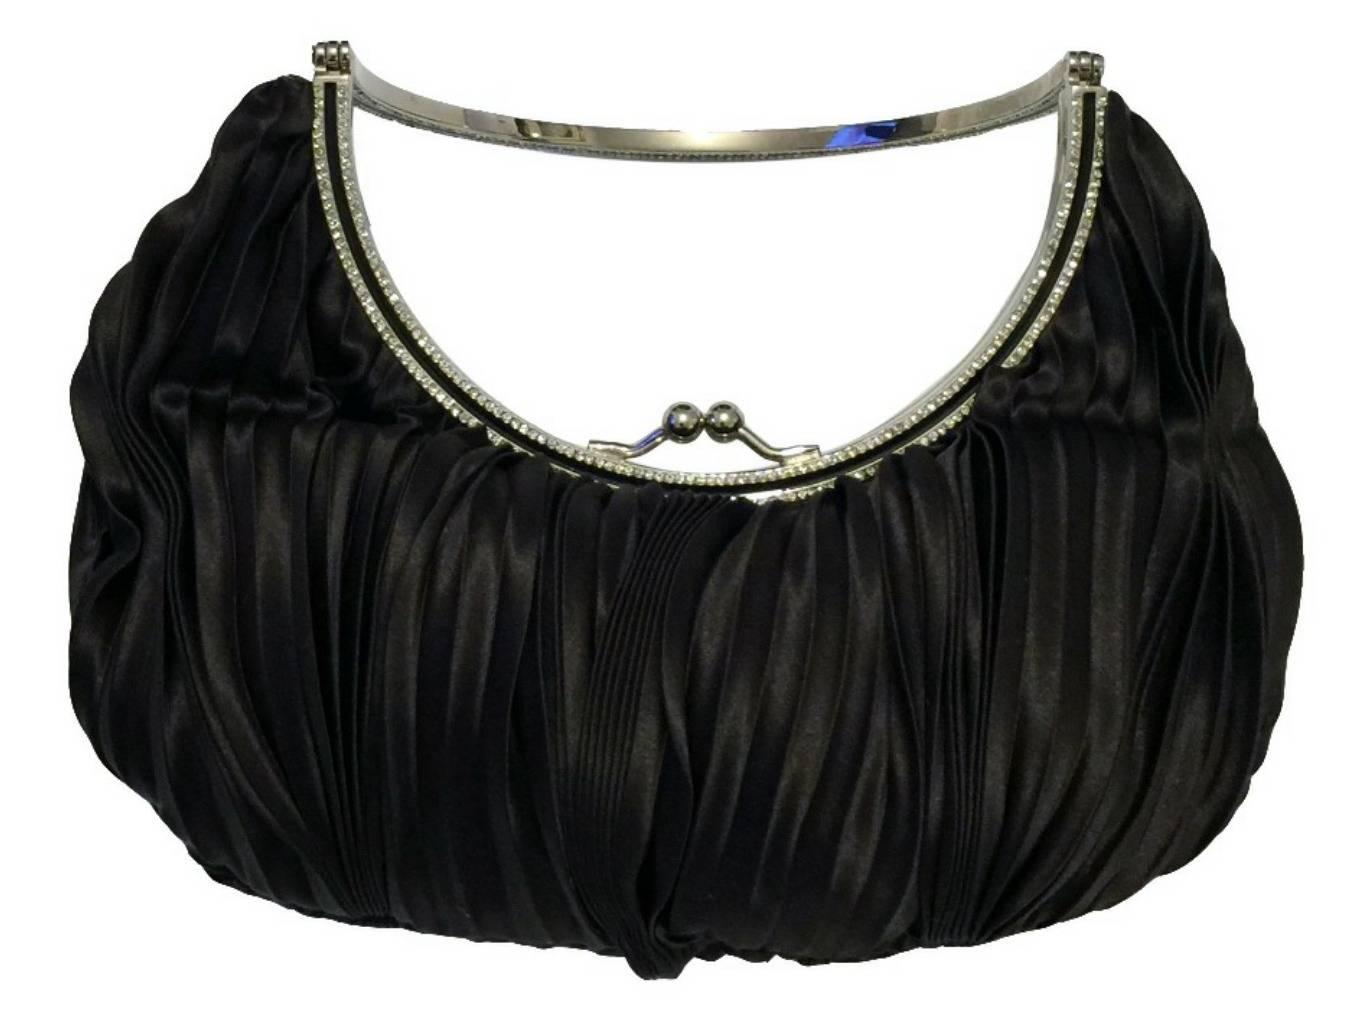 Valentino Evening Bag.  Chocolate Brown Pleated Silk.  Silk Satin Lined Interior with Clasp Closure and Rhinestone Diamanté Handle with Chrome.   Made in Italy.  100% Silk.  Width 9 Inches; Depth 4.5 Inches; Original Dust Bag.  Valentino Collection